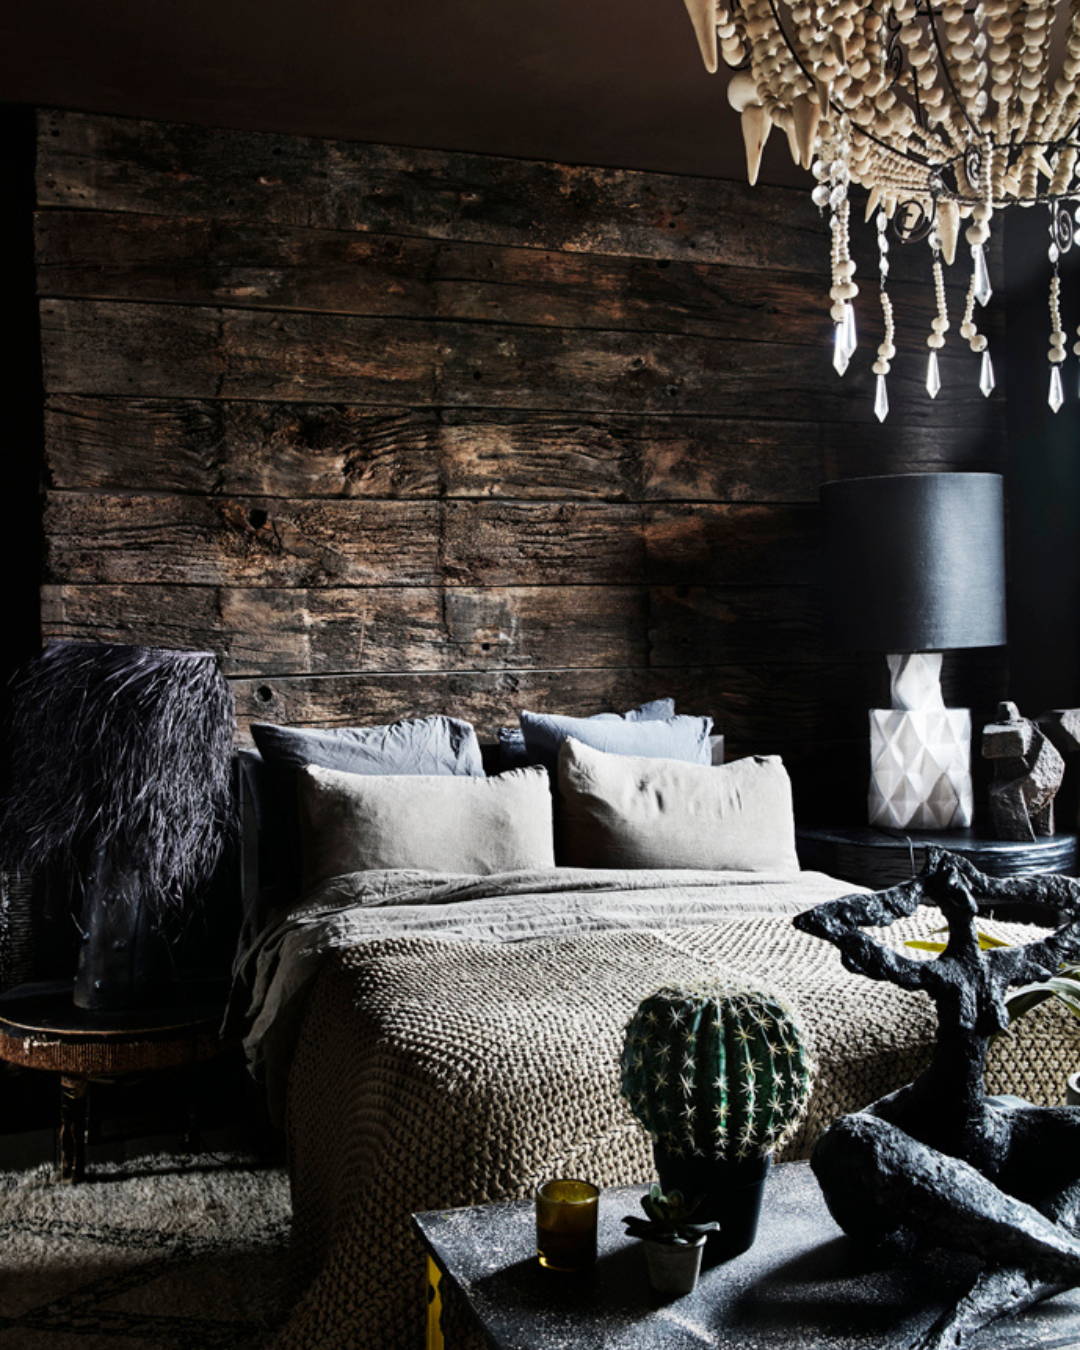 A stylish bedroom with walls made from reclaimed wood, large bedside lamps and linen bedding with a chunky wool throw.  A table at the end of the bed with plants and sculpture.